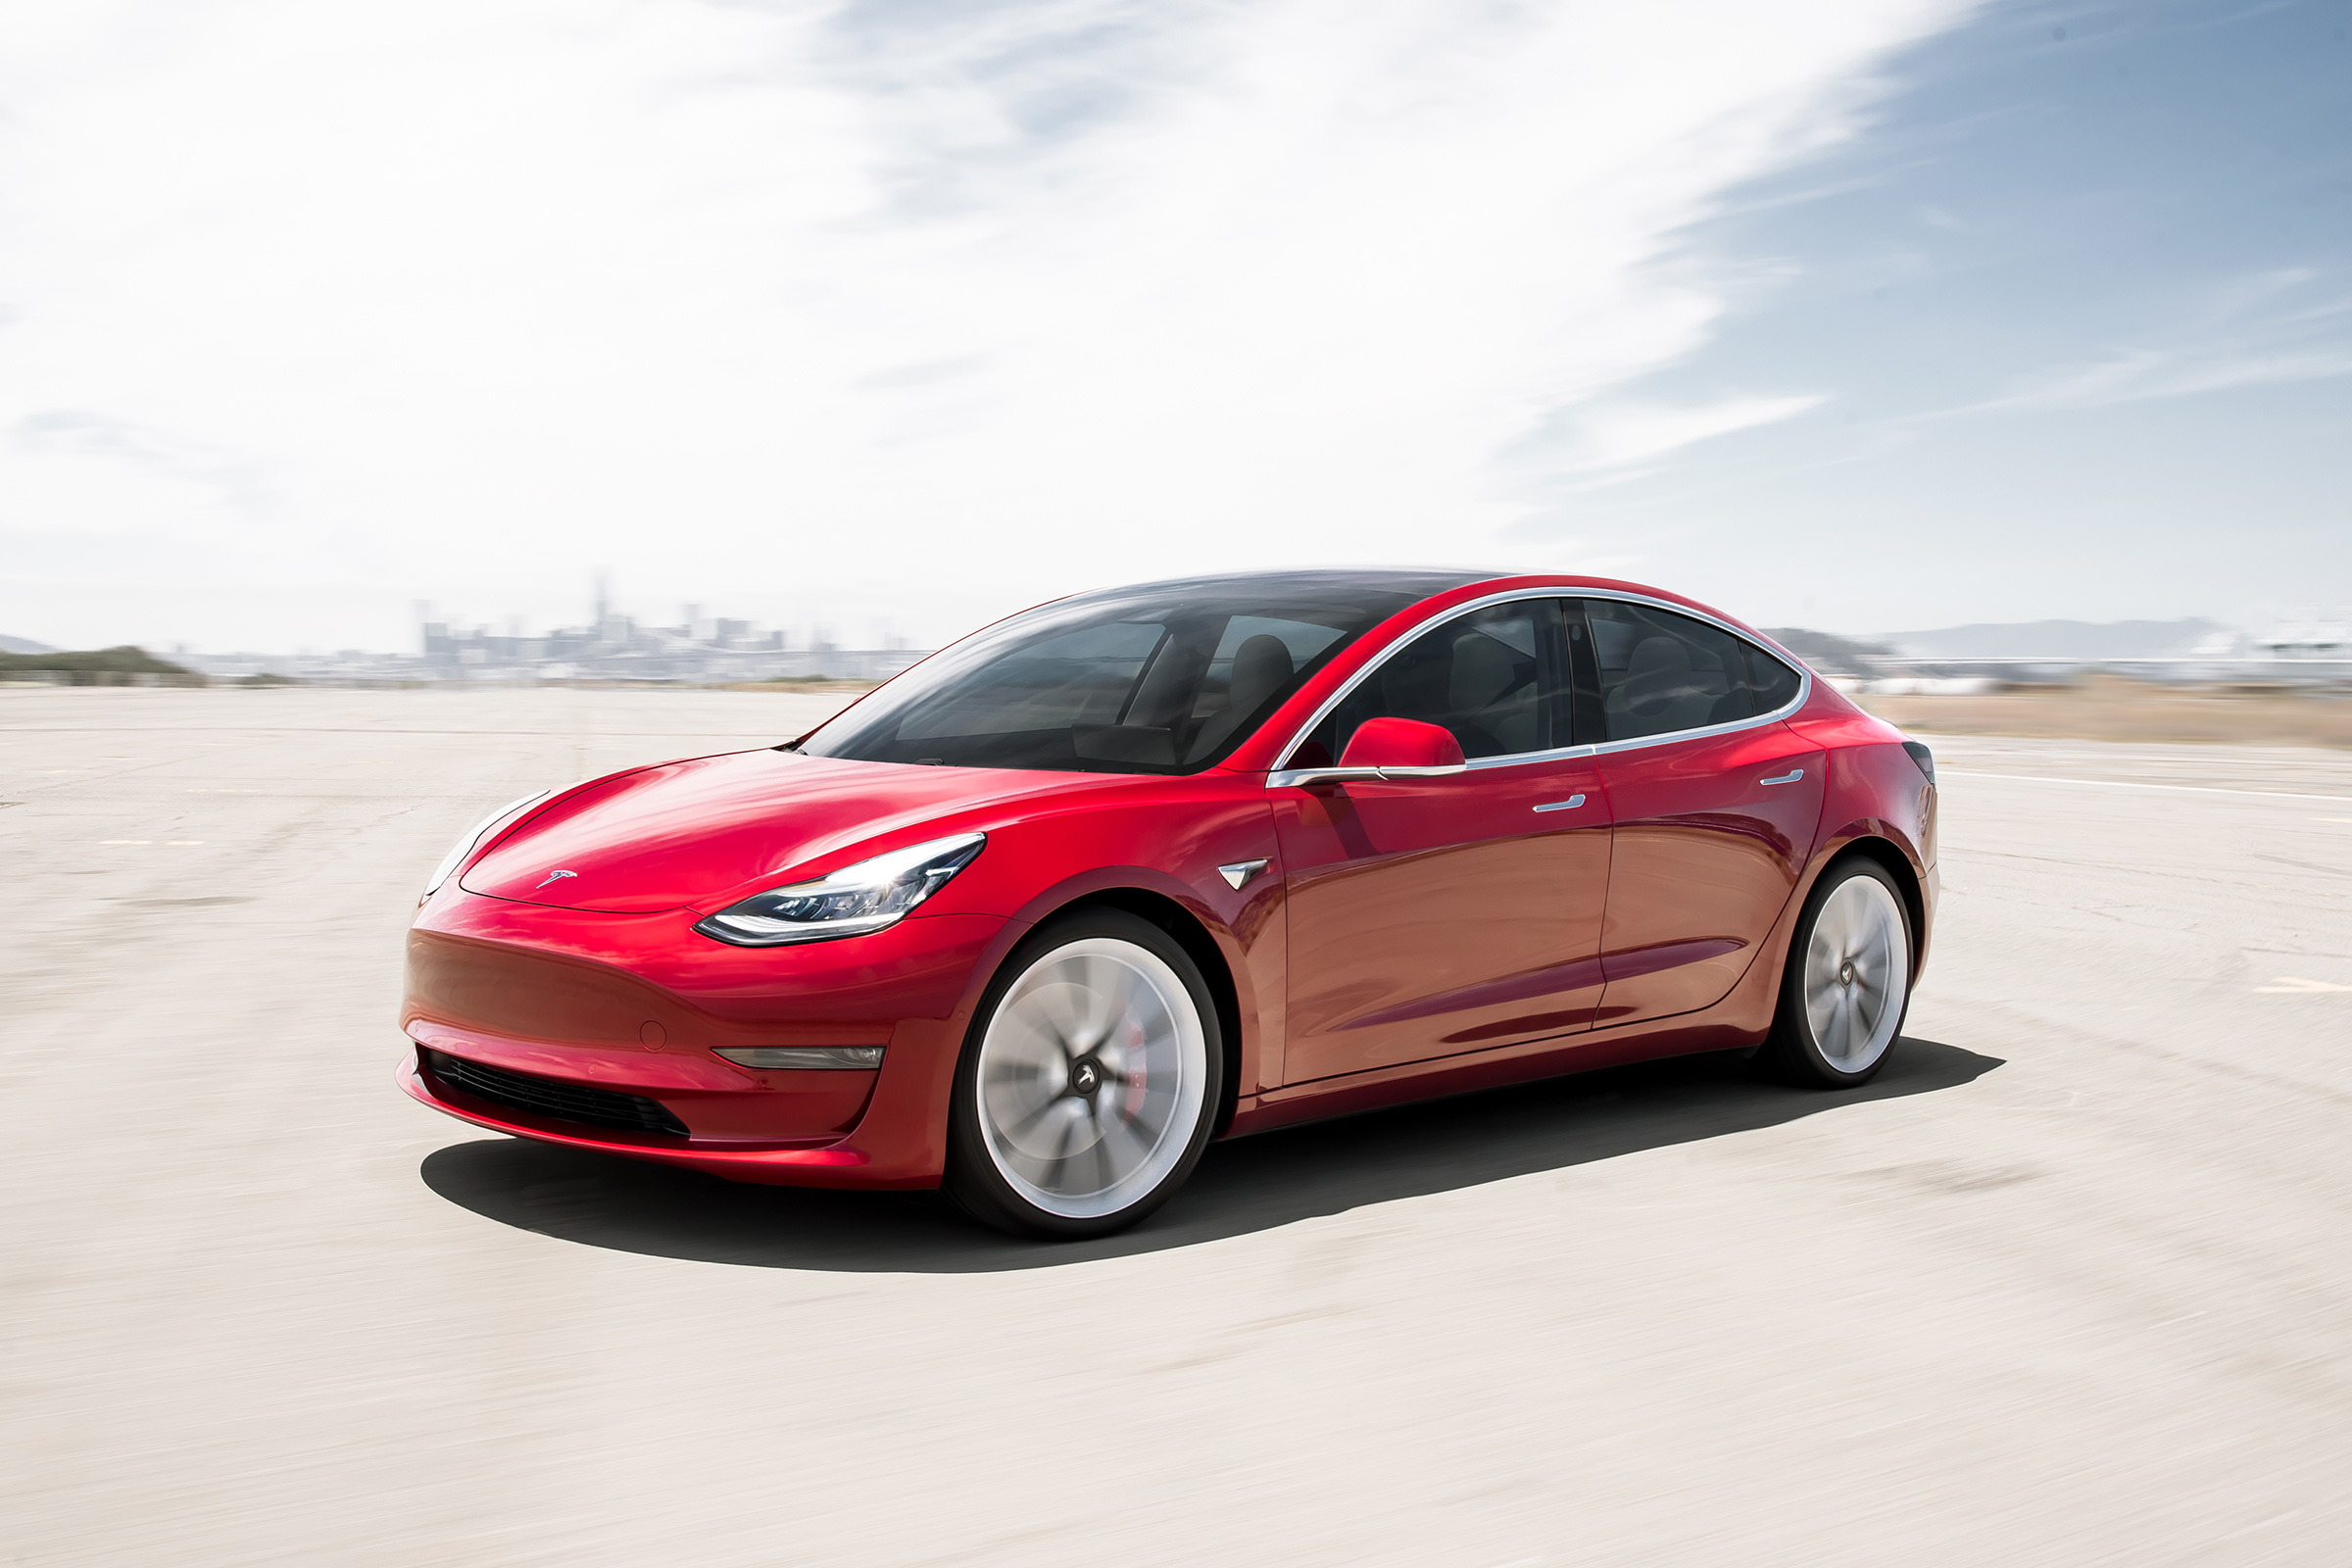 Tesla Model 3 specs, prices and full details on the allelectric